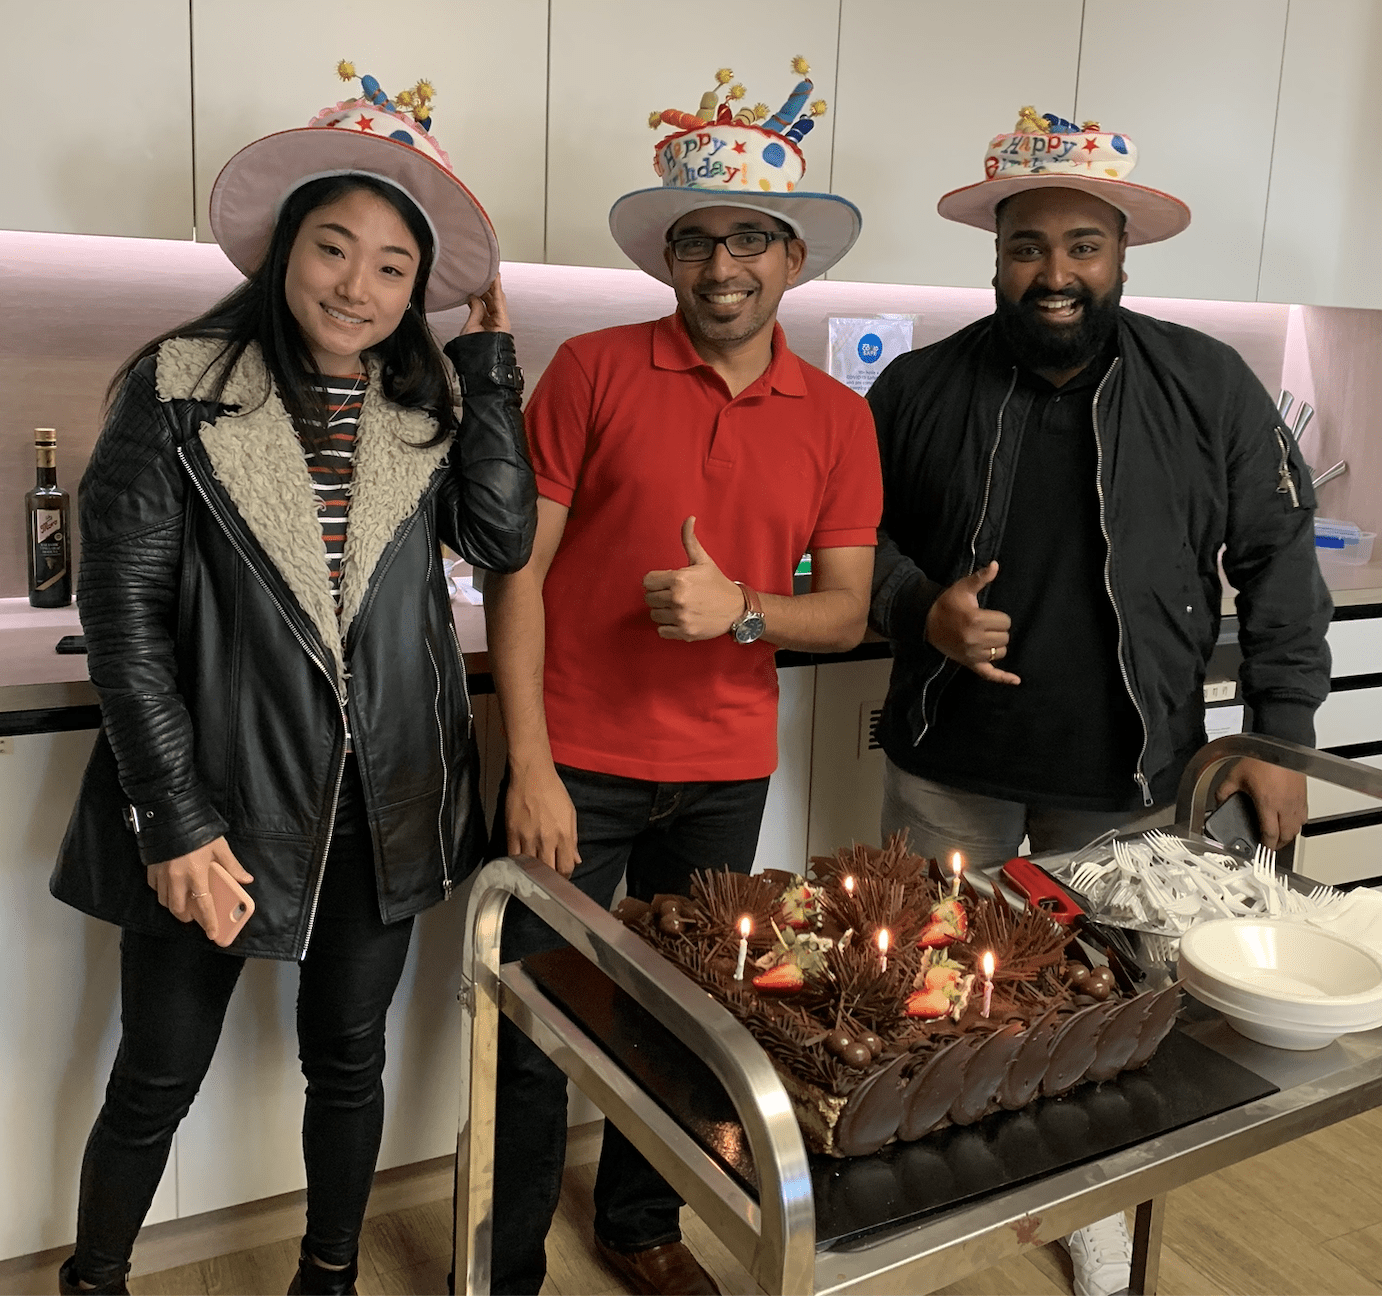 Three happy employees standing in front of a birthday cake at a company event